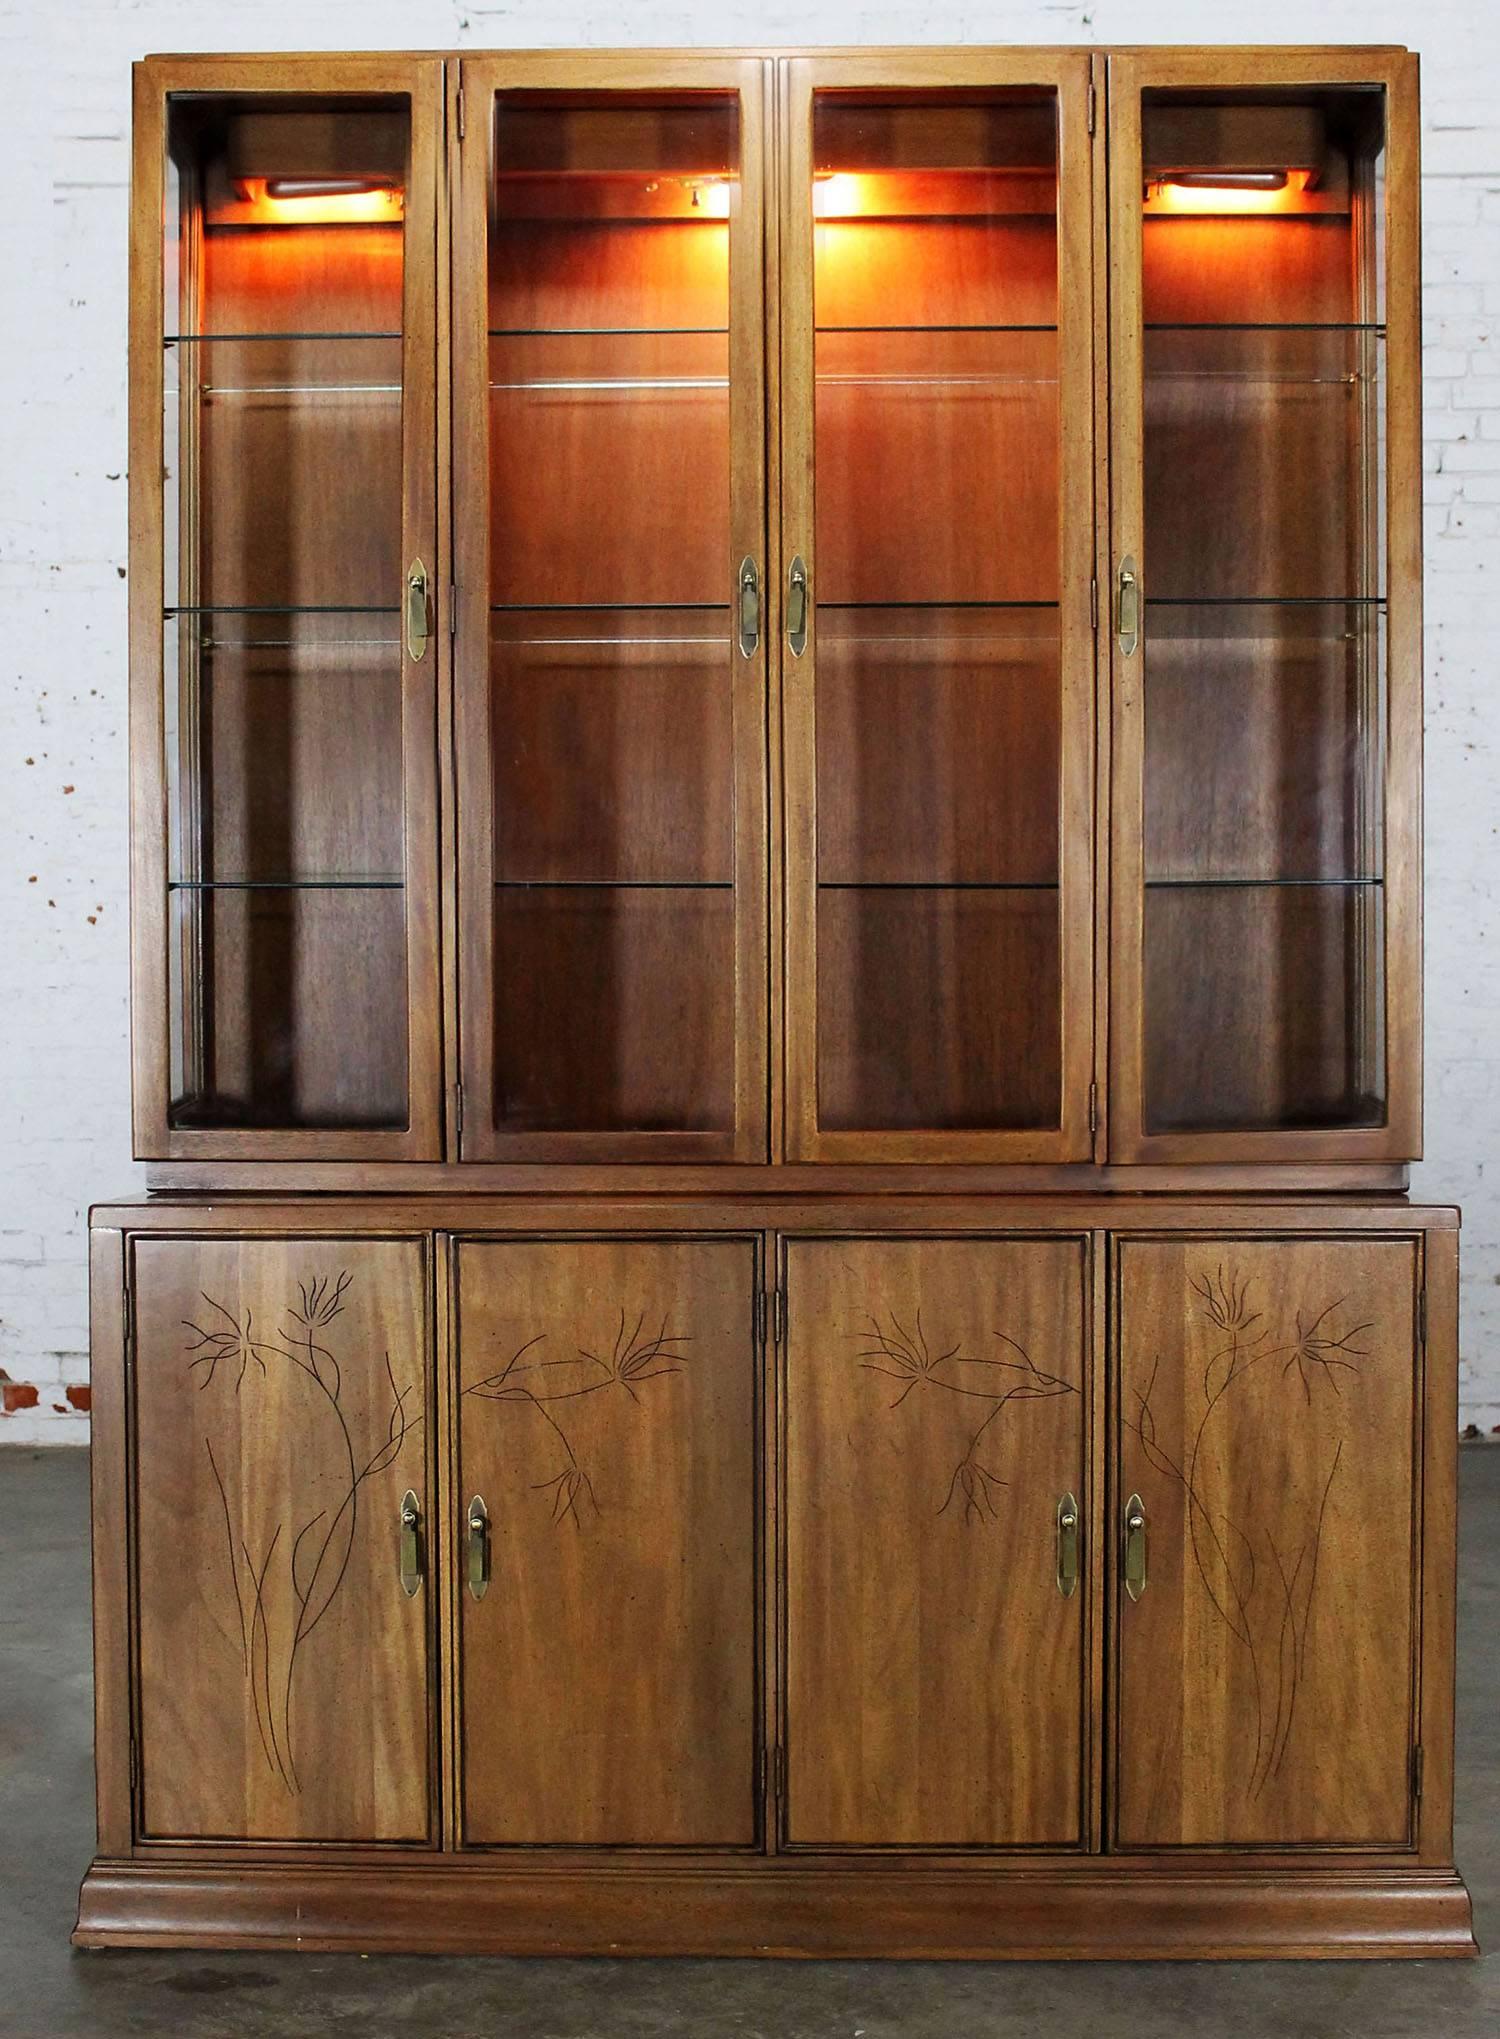 Gorgeous Mid-Century Modern, circa 1970 mahogany lighted display cabinet or china hutch with an incredibly beautiful and delicate almost Asian floral carving. In wonderful vintage condition with no outstanding flaws we have noticed.